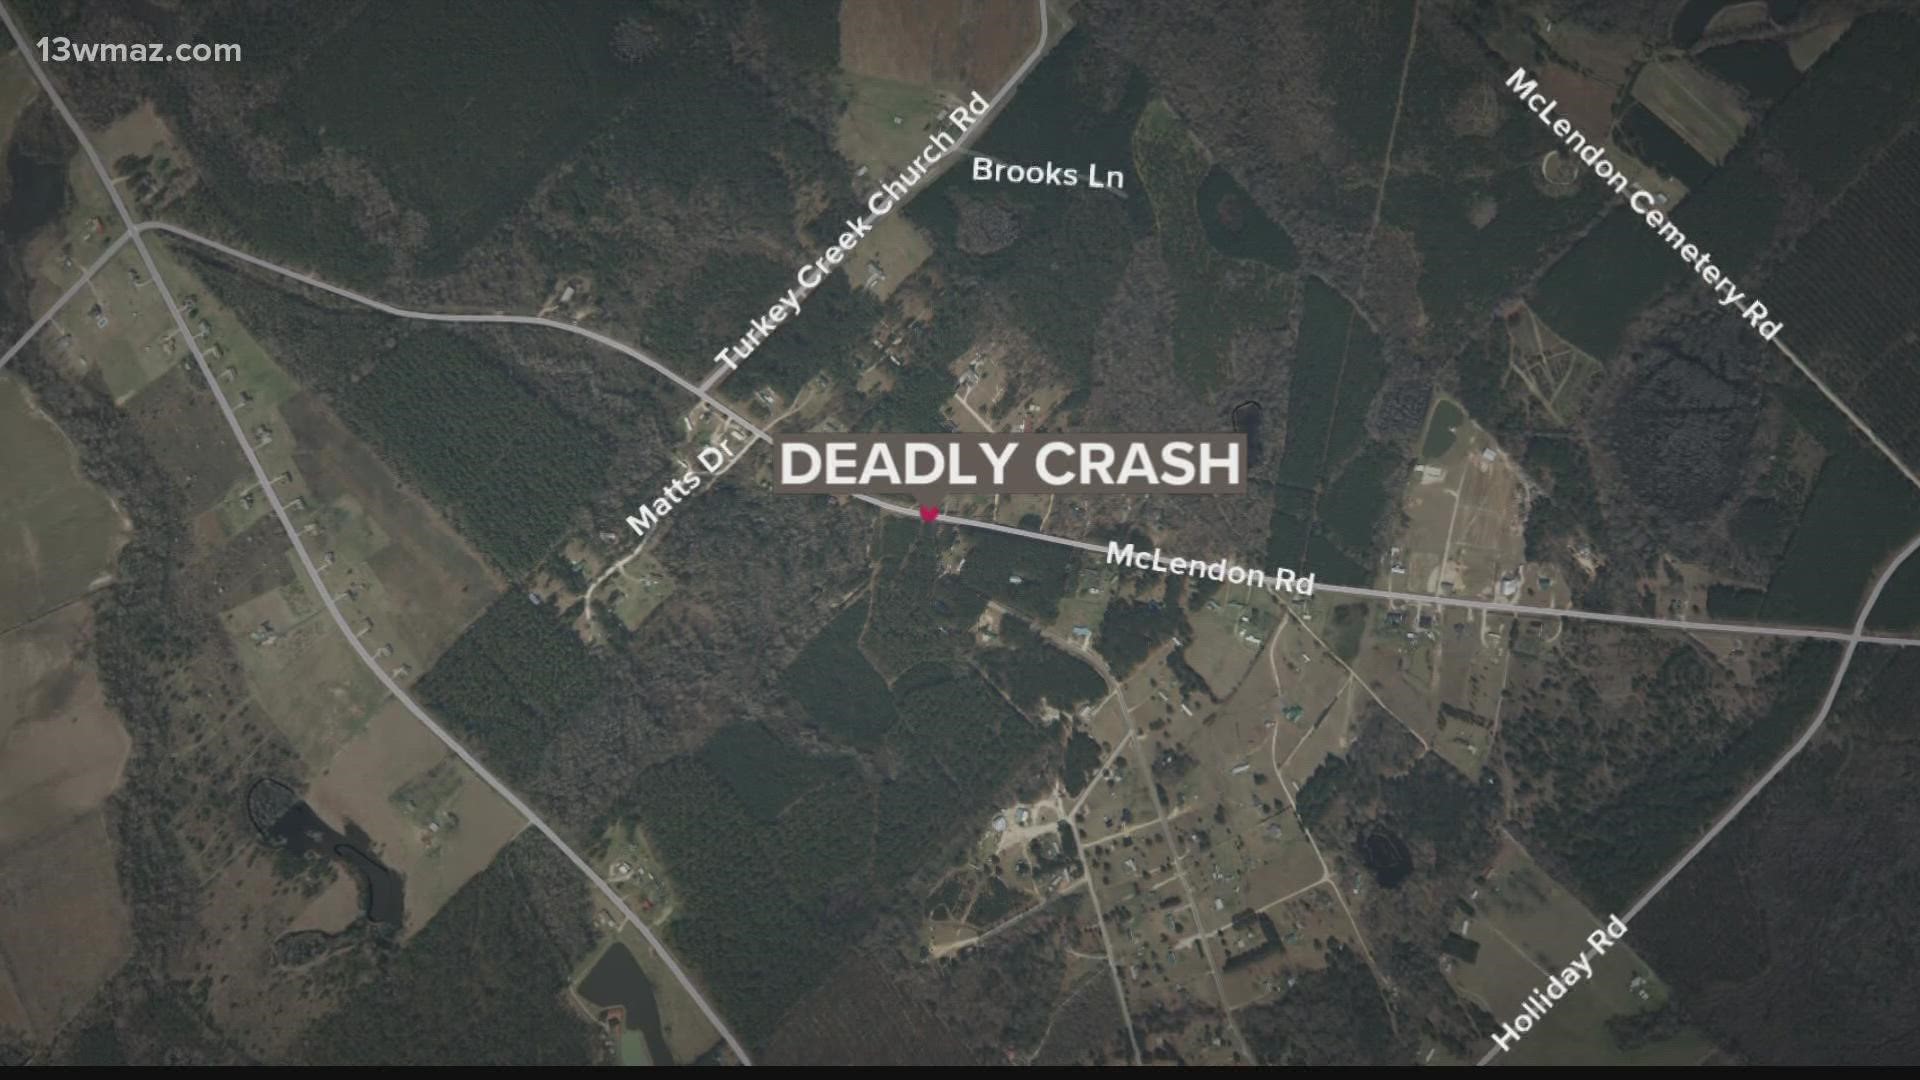 The Georgia State Patrol says say alcohol was involved in the crash.